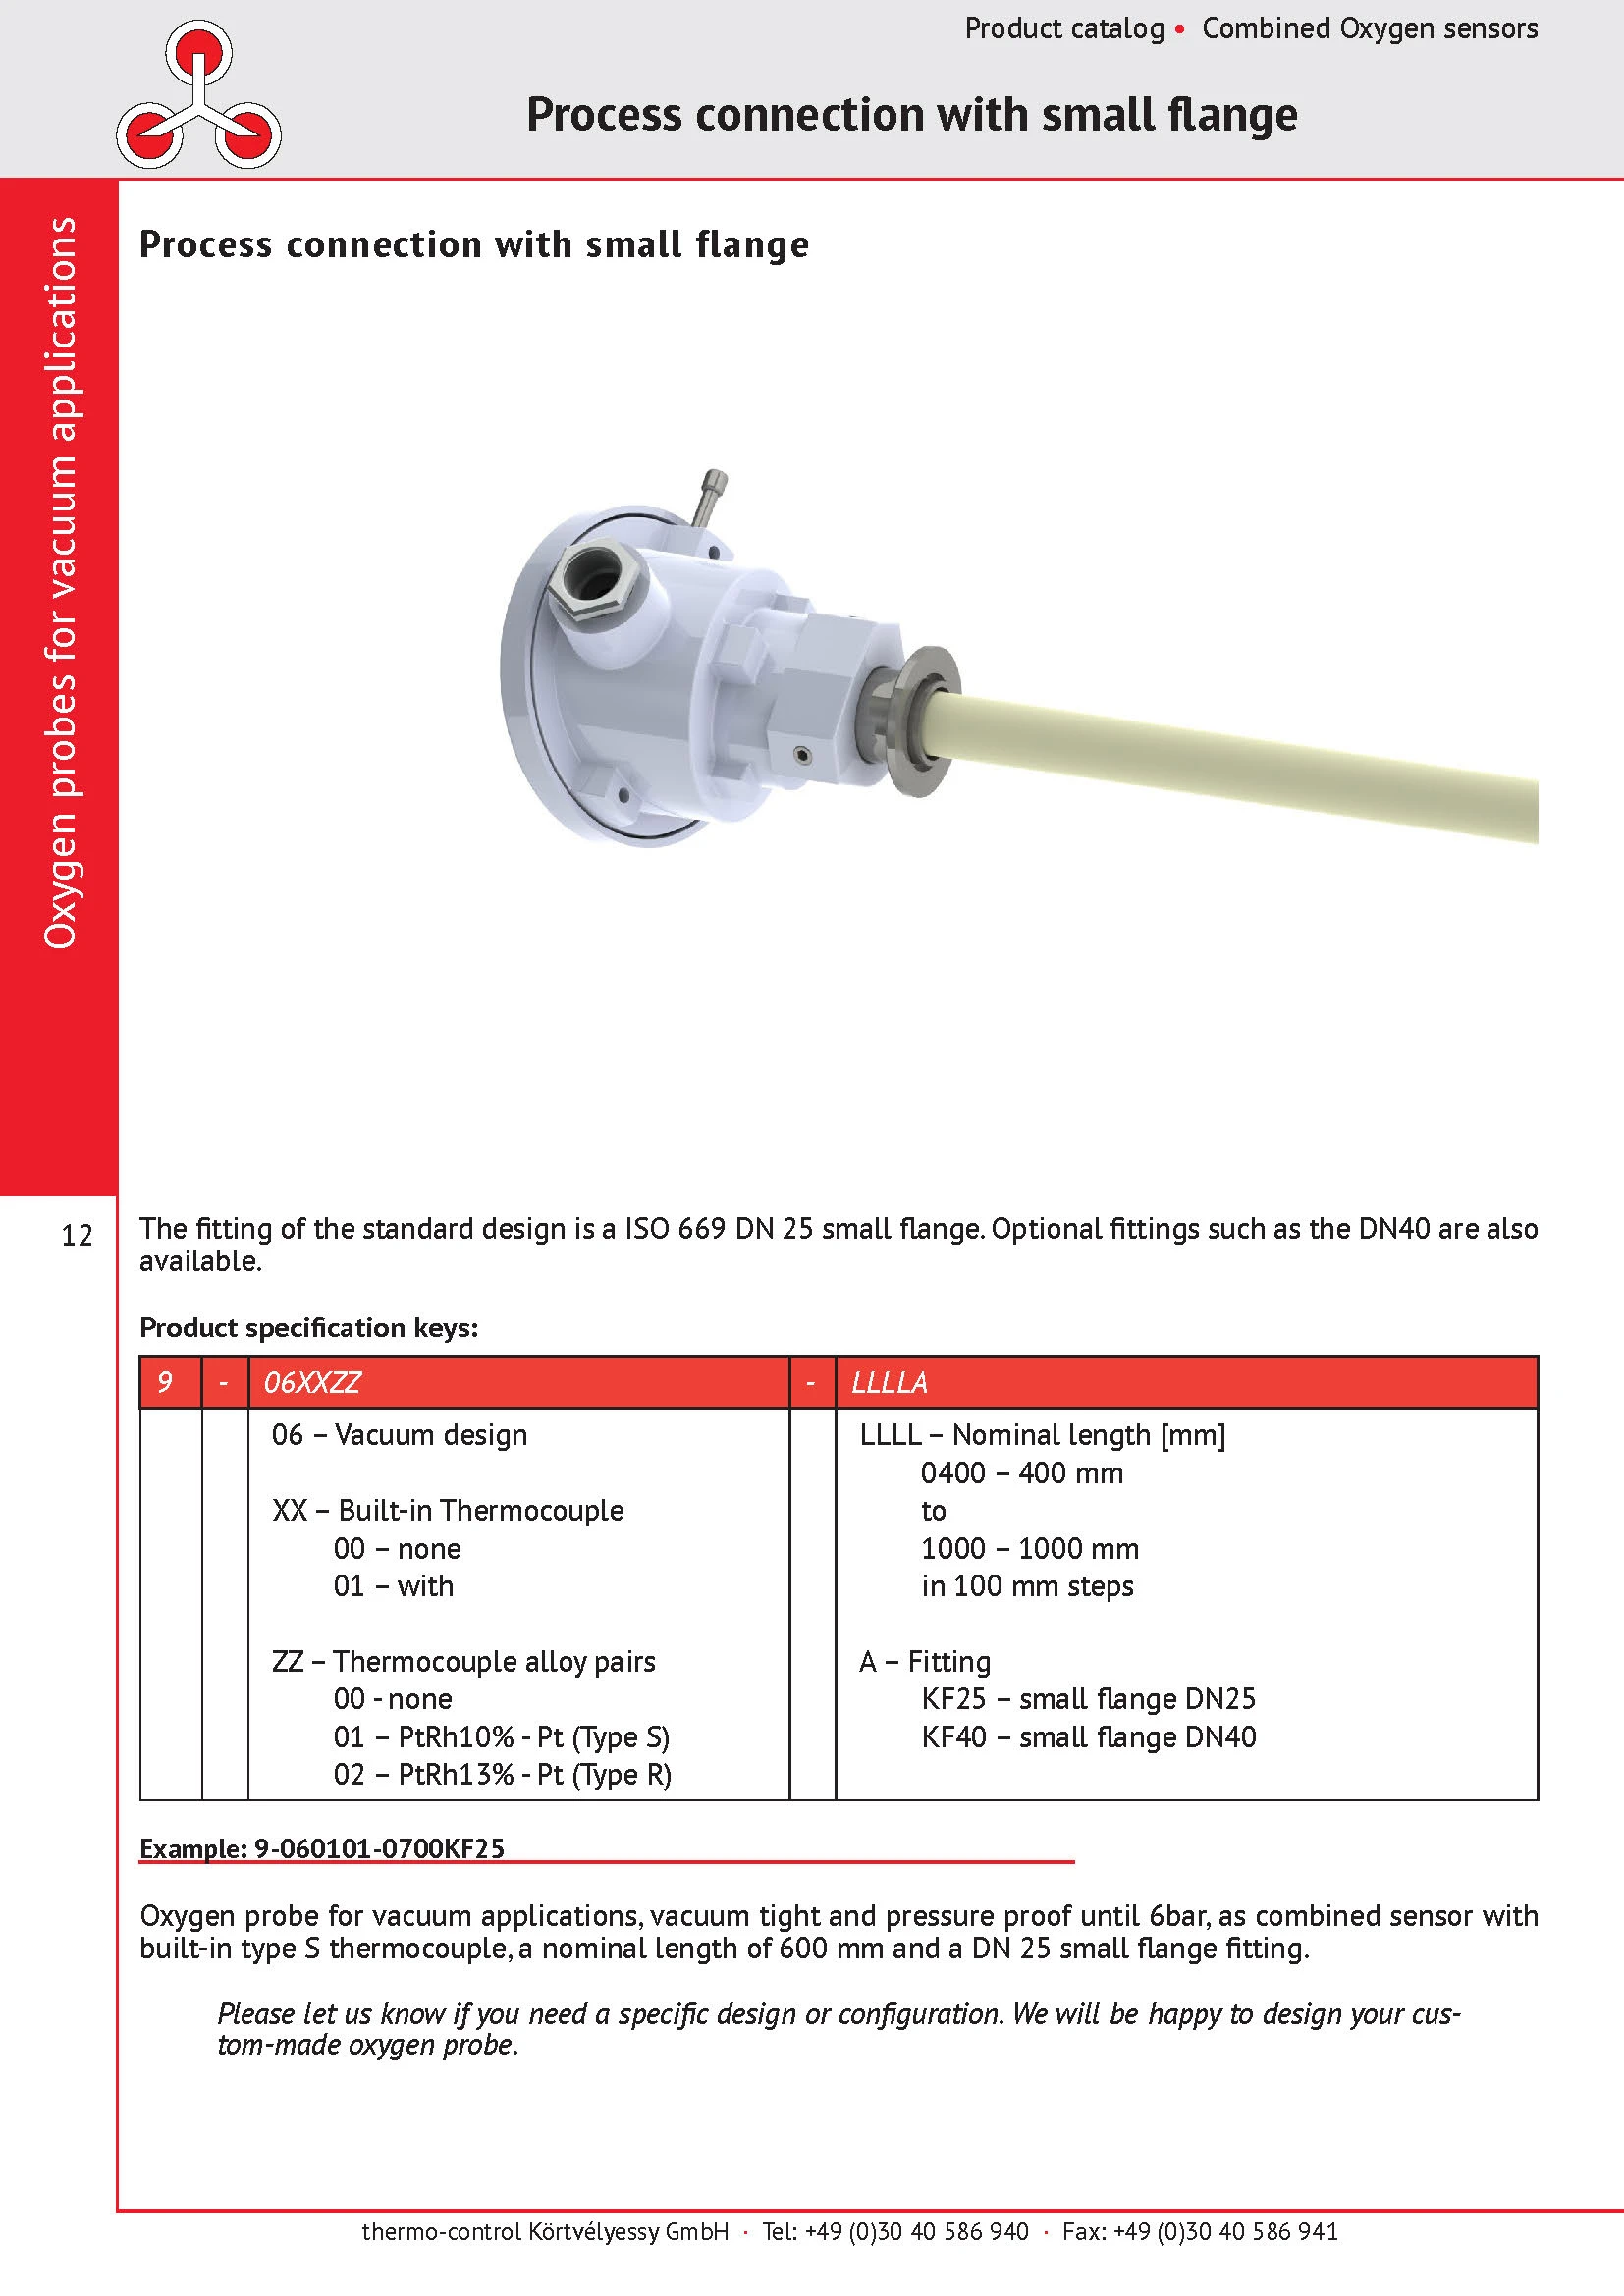 thermo-control Körtvélyessy - Catalog for vacuum oxygen probes with KF fitting